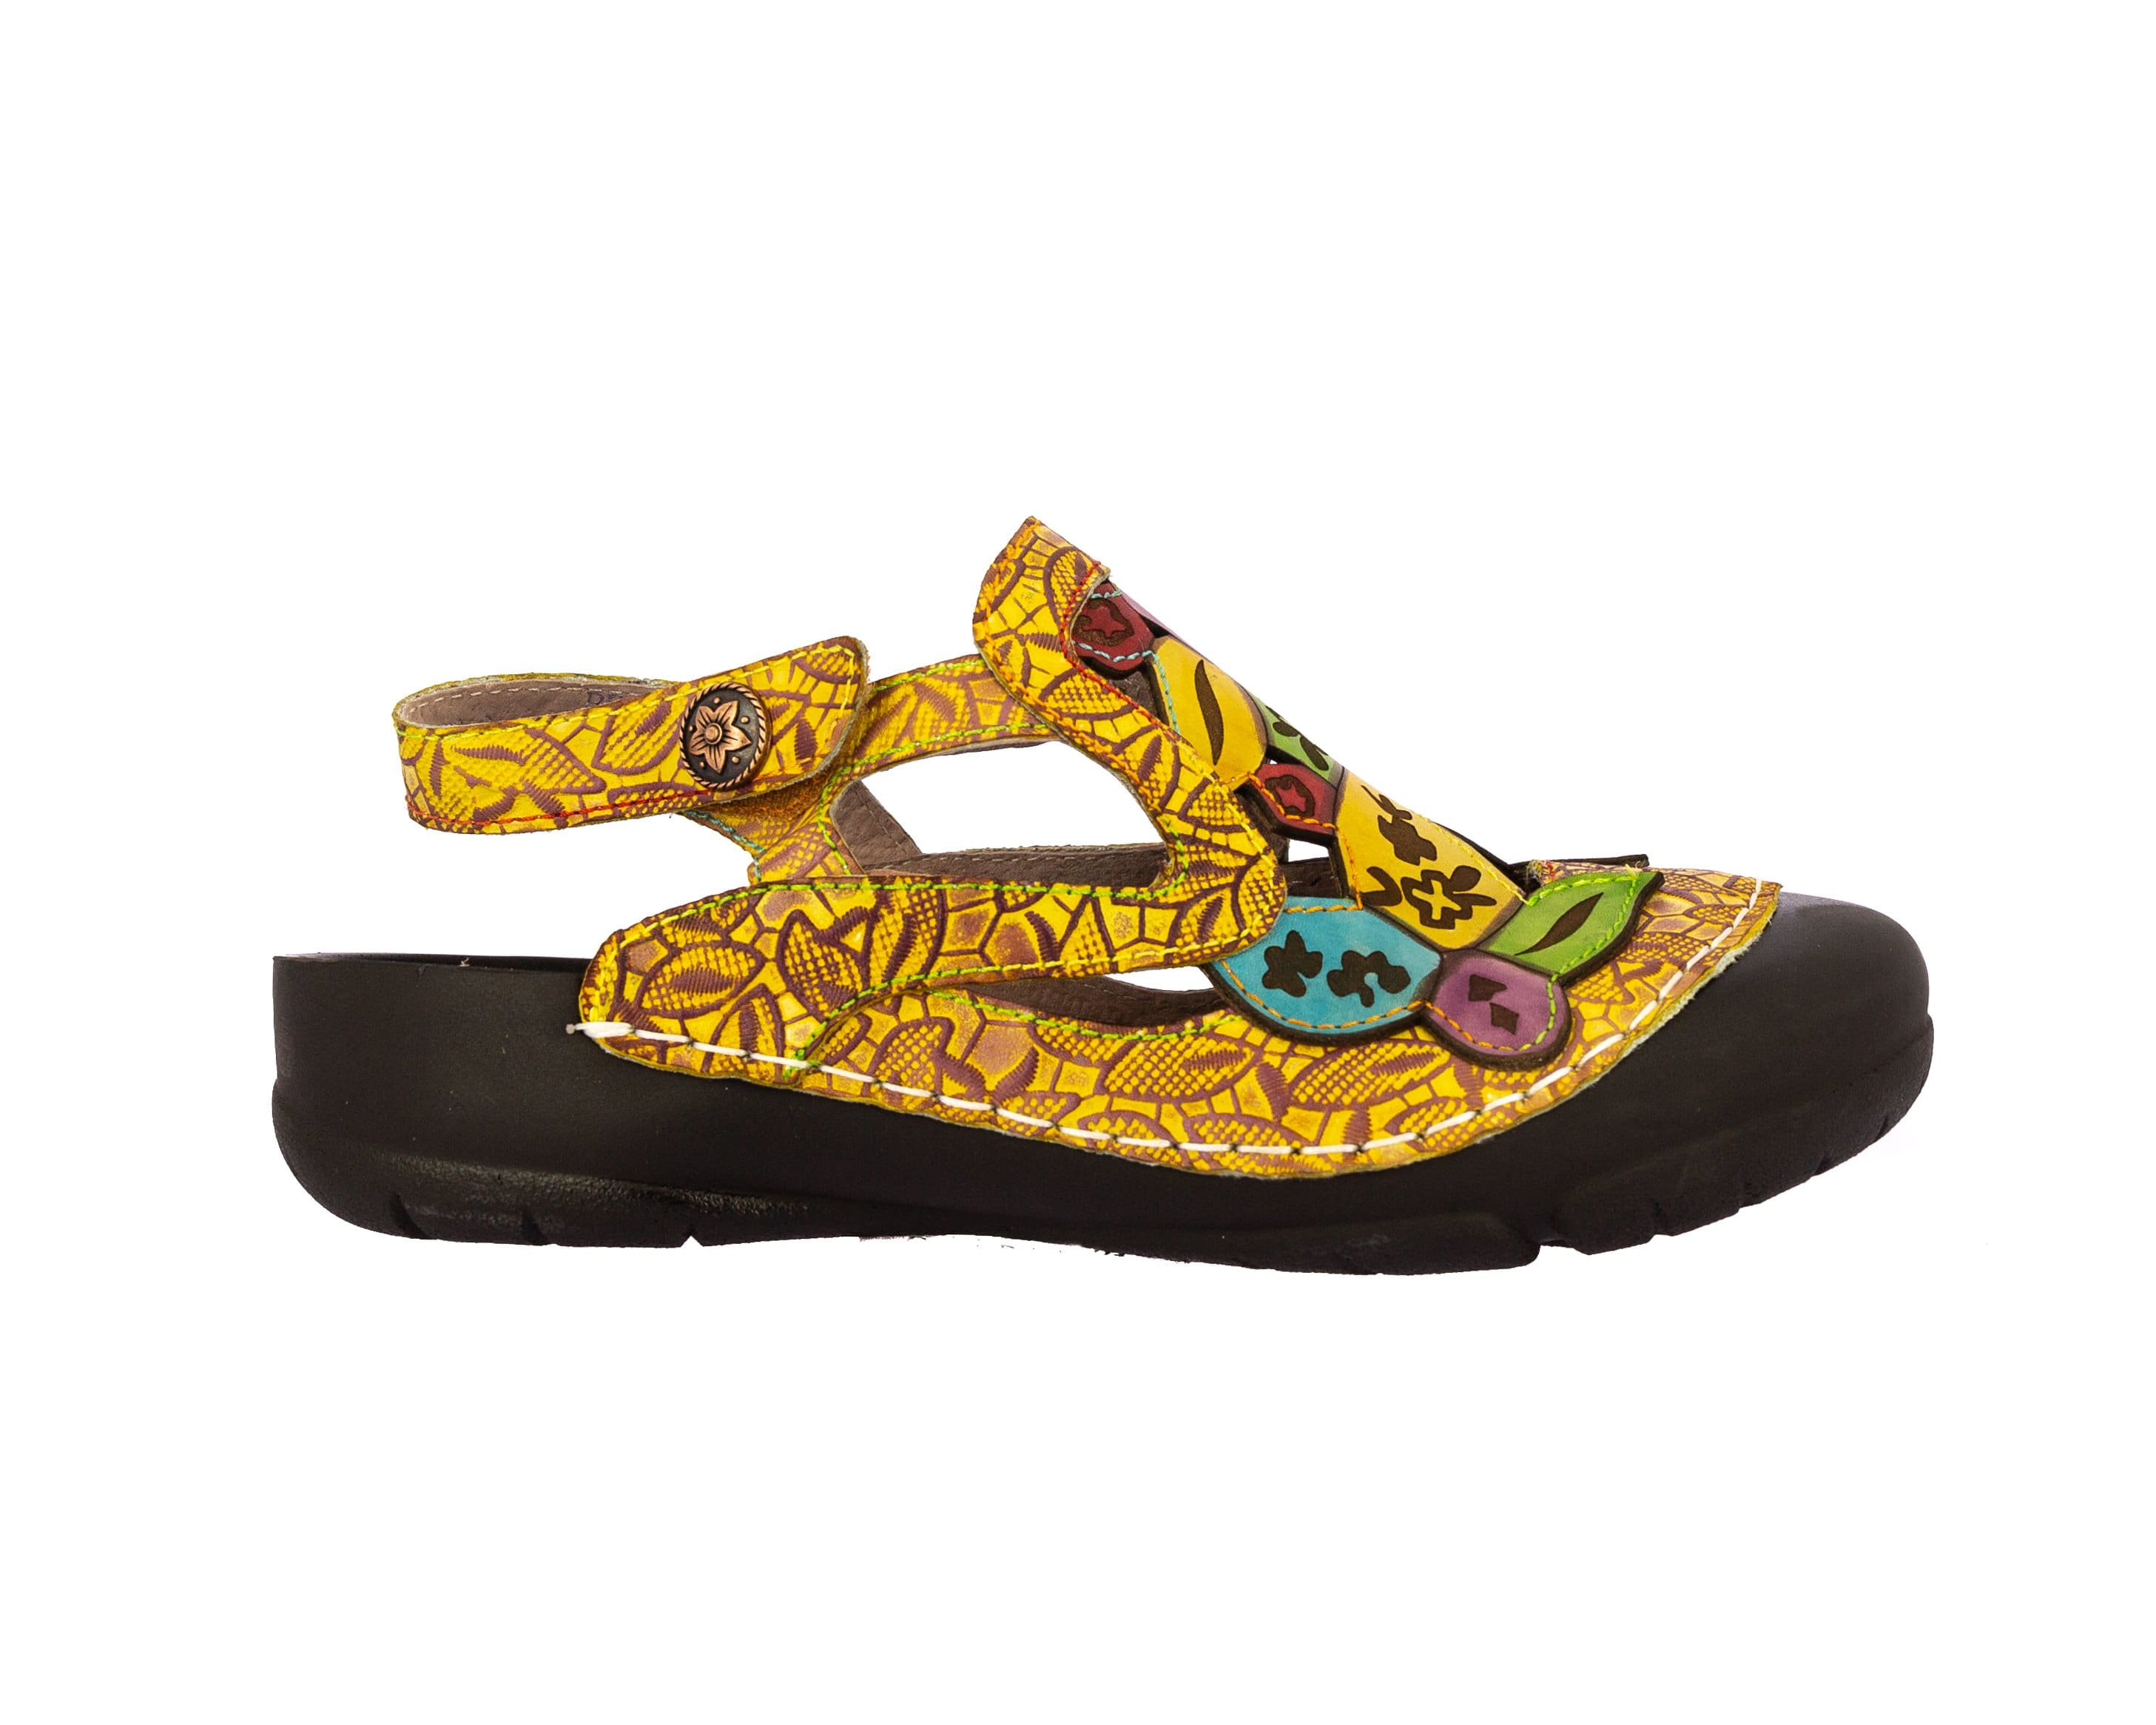 BECZIERSO 01 shoes - 35 / YELLOW - Sandal